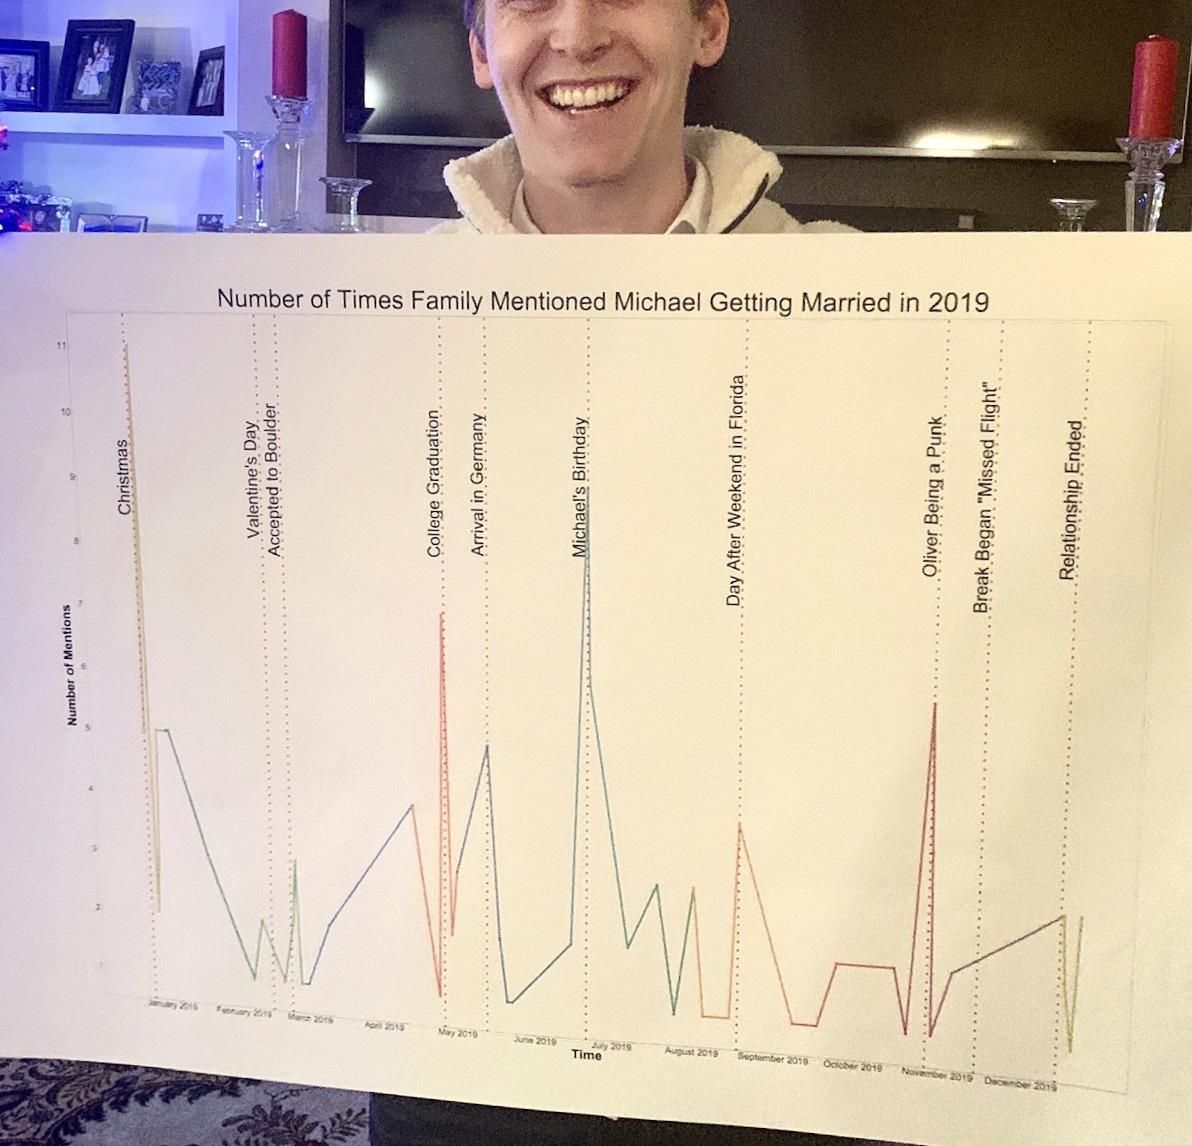 I tracked the number of times my family mentioned me getting married over the past year, plotted and printed it.